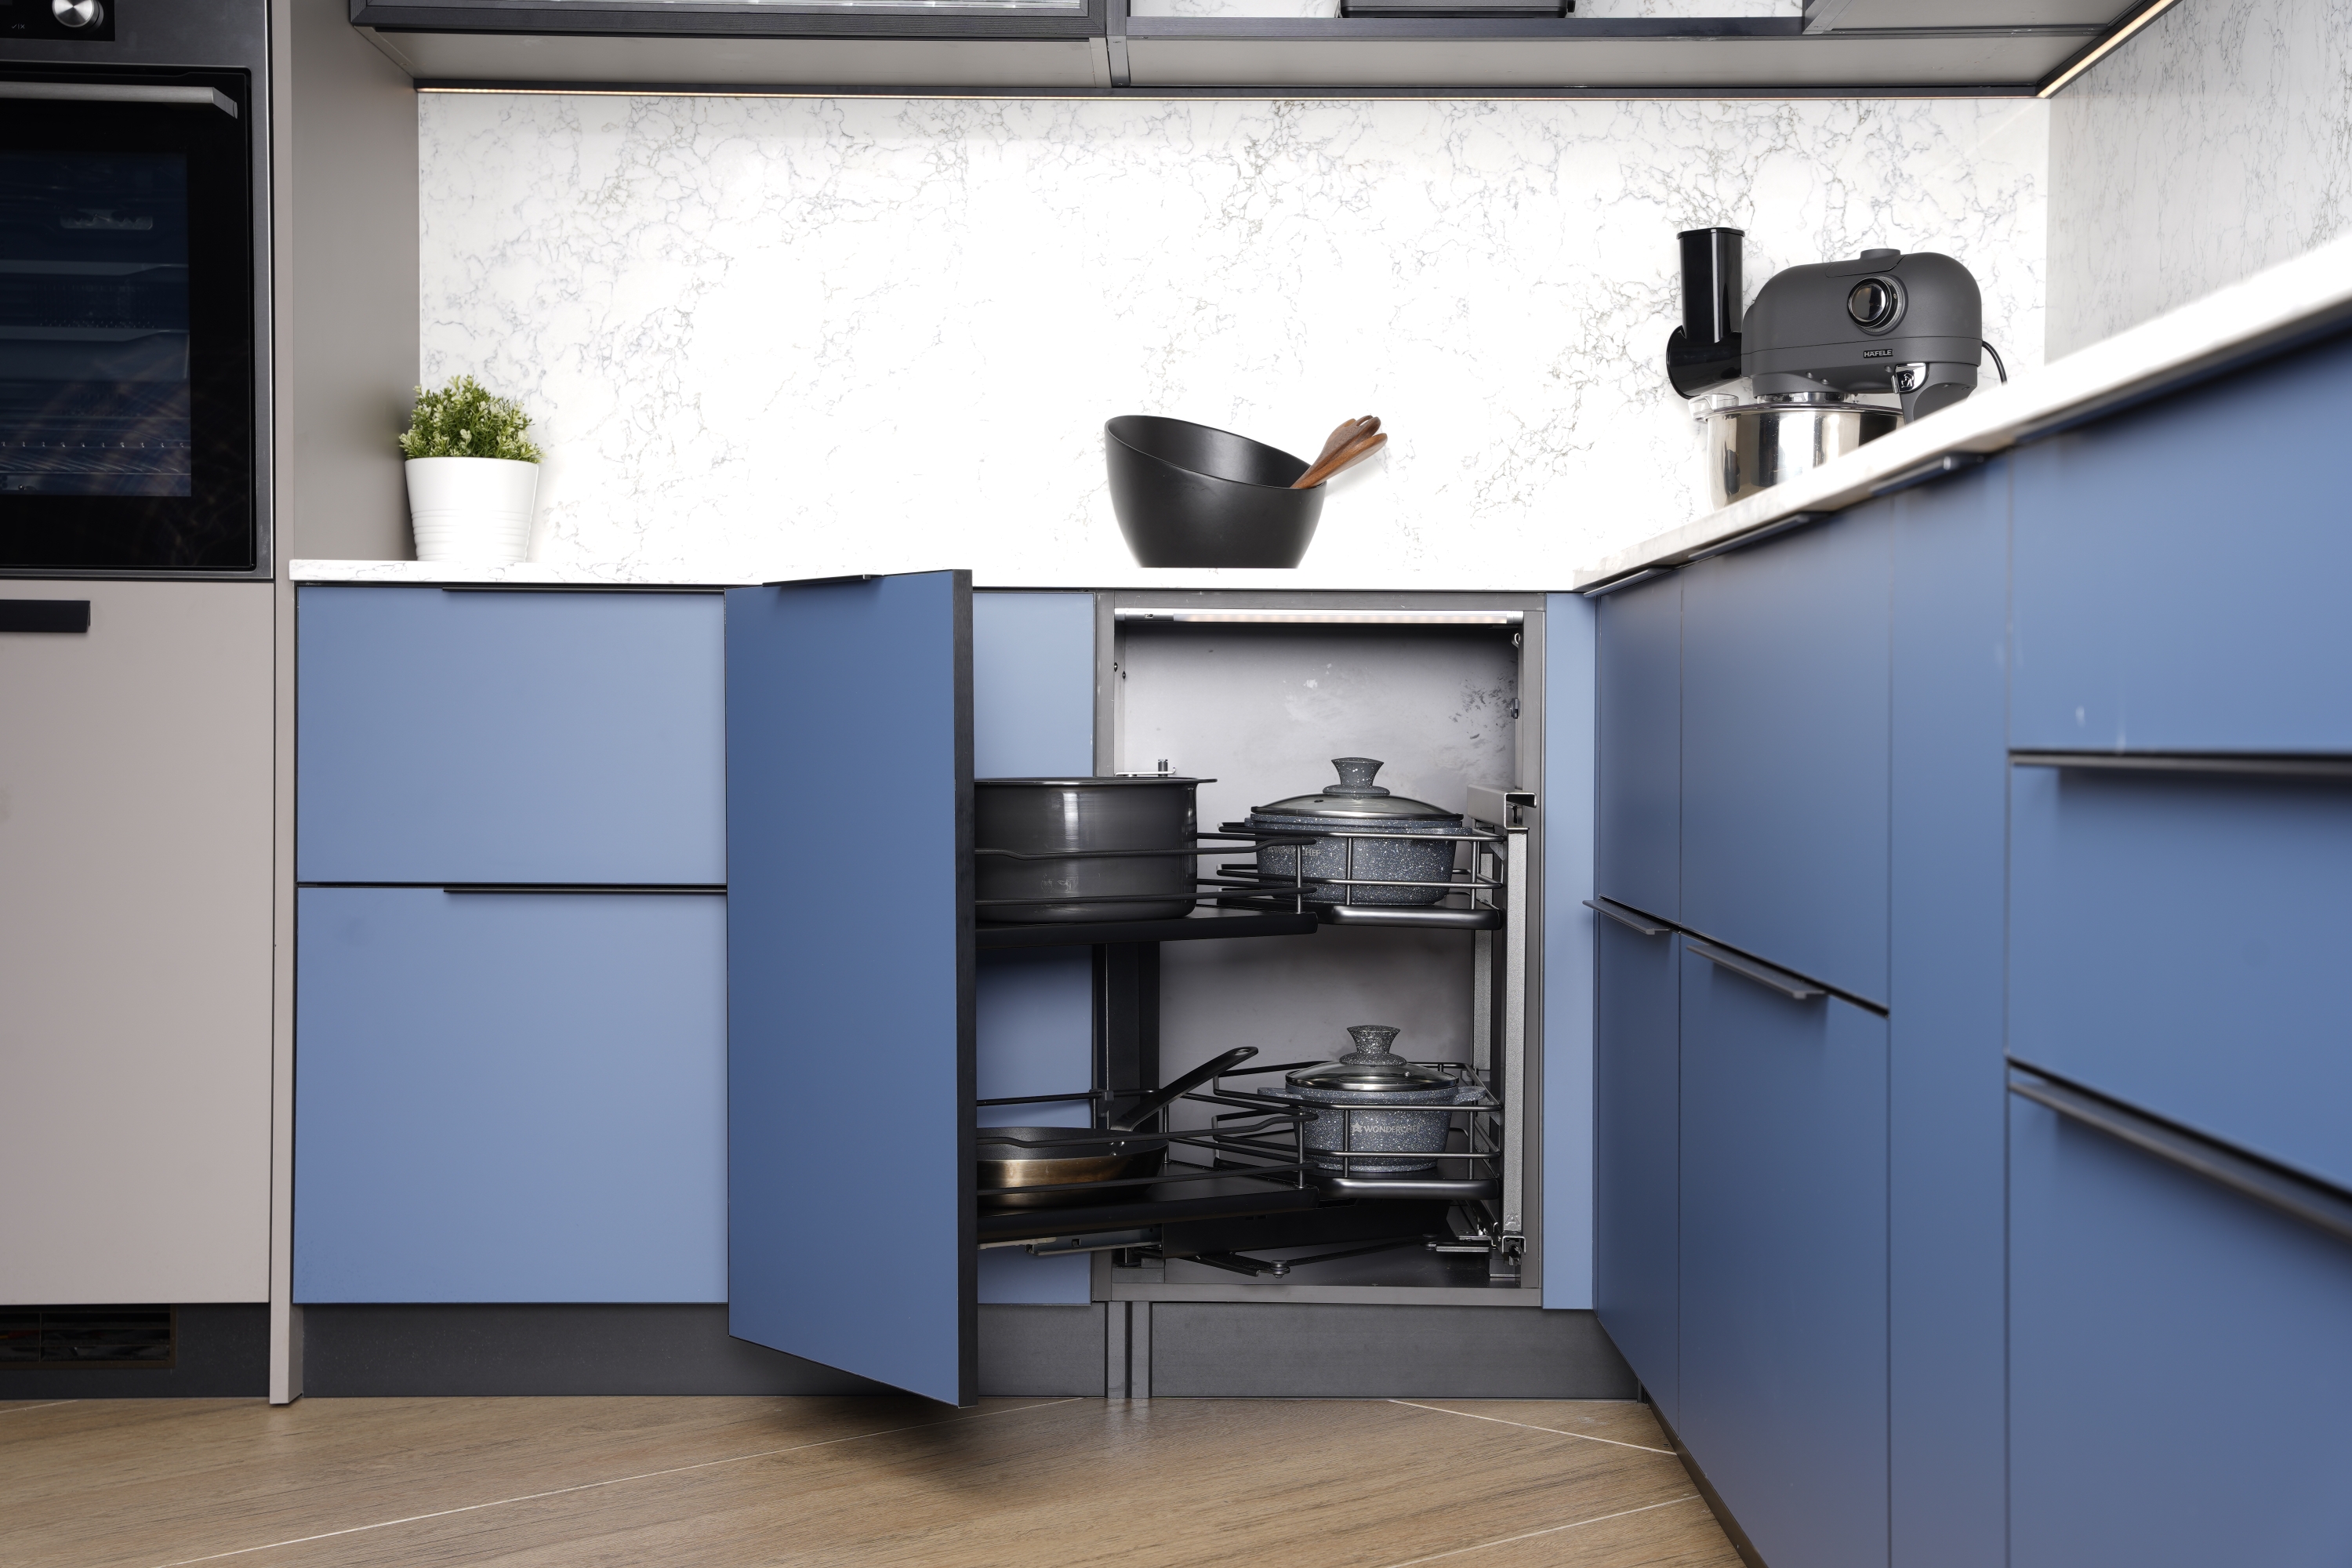 Hafele Launches New In-house Range of Kitchen And Home Solutions